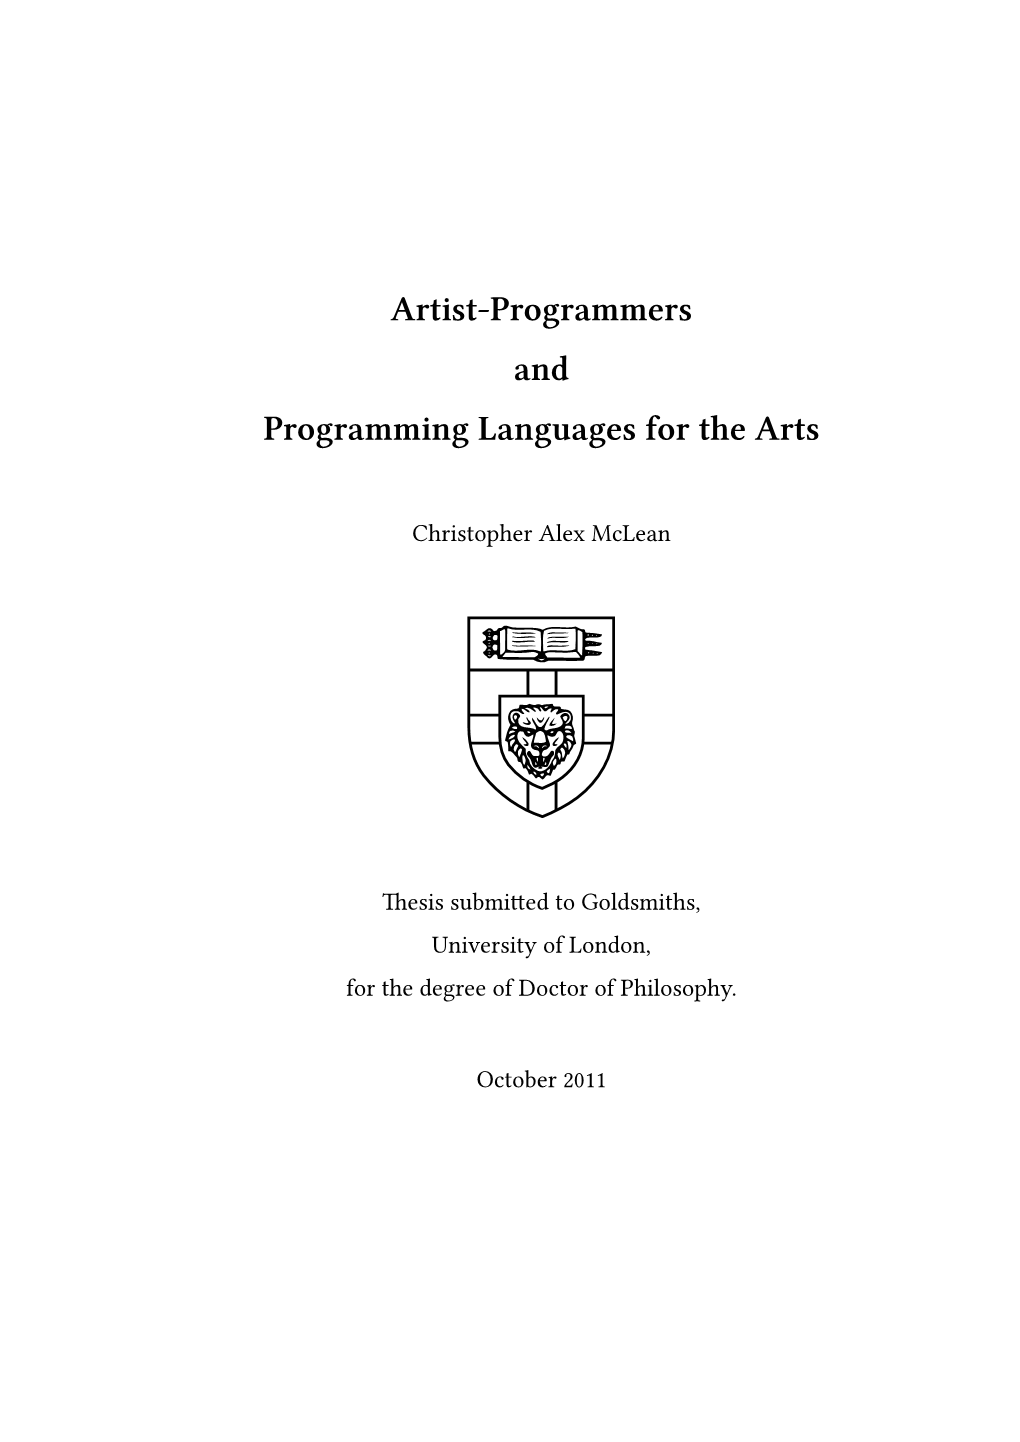 Artist-Programmers and Programming Languages for the Arts